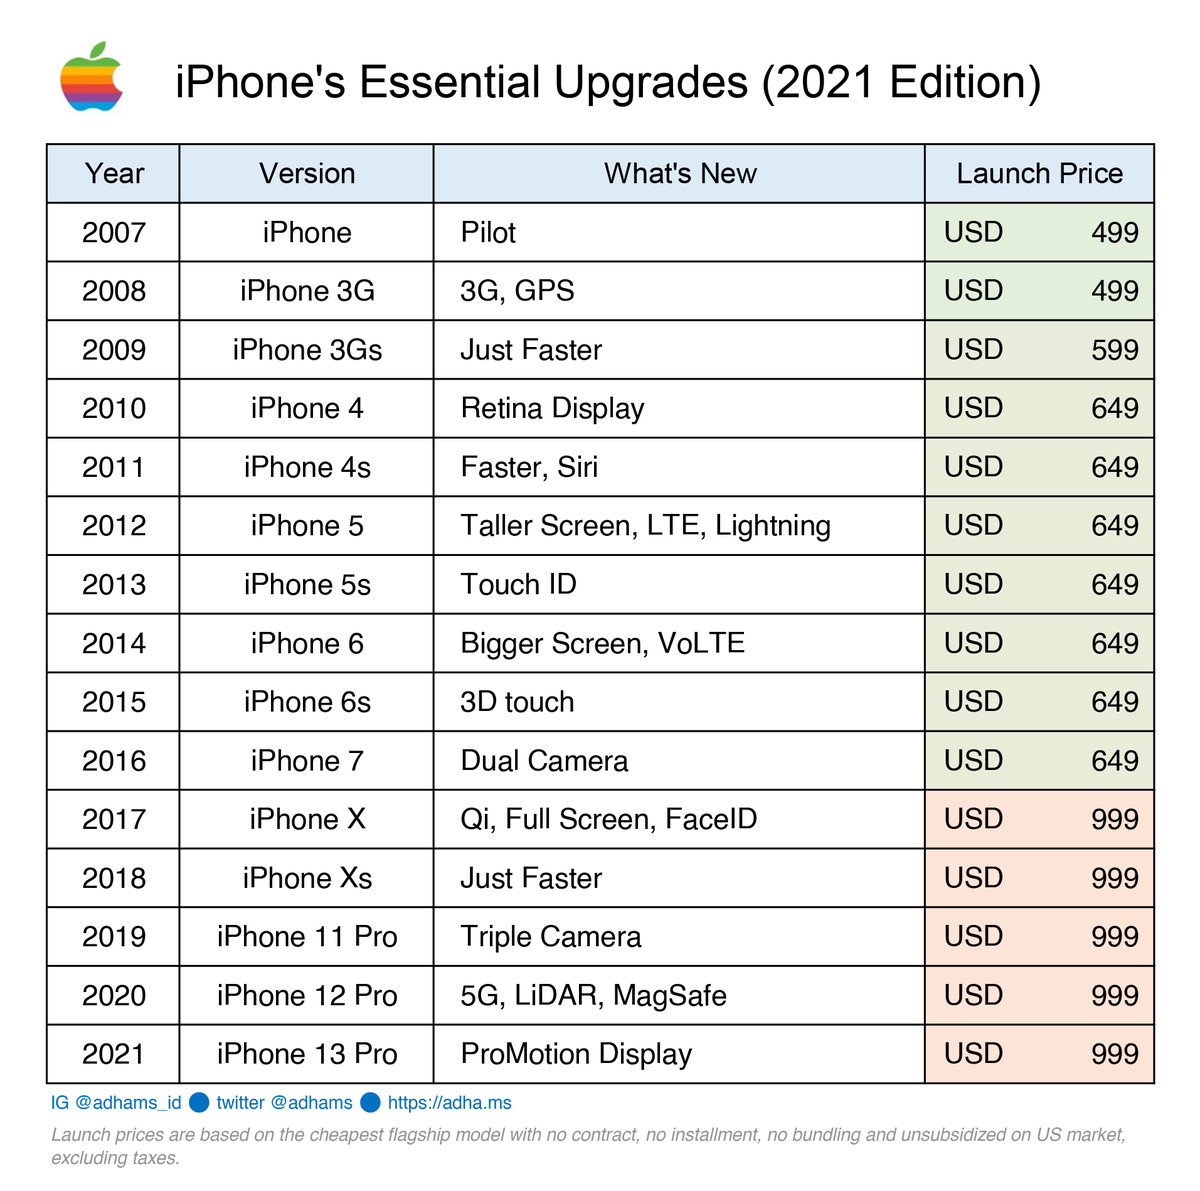 So, what's the essential upgrade(s) in #iPhone each year? 2021 Edition.